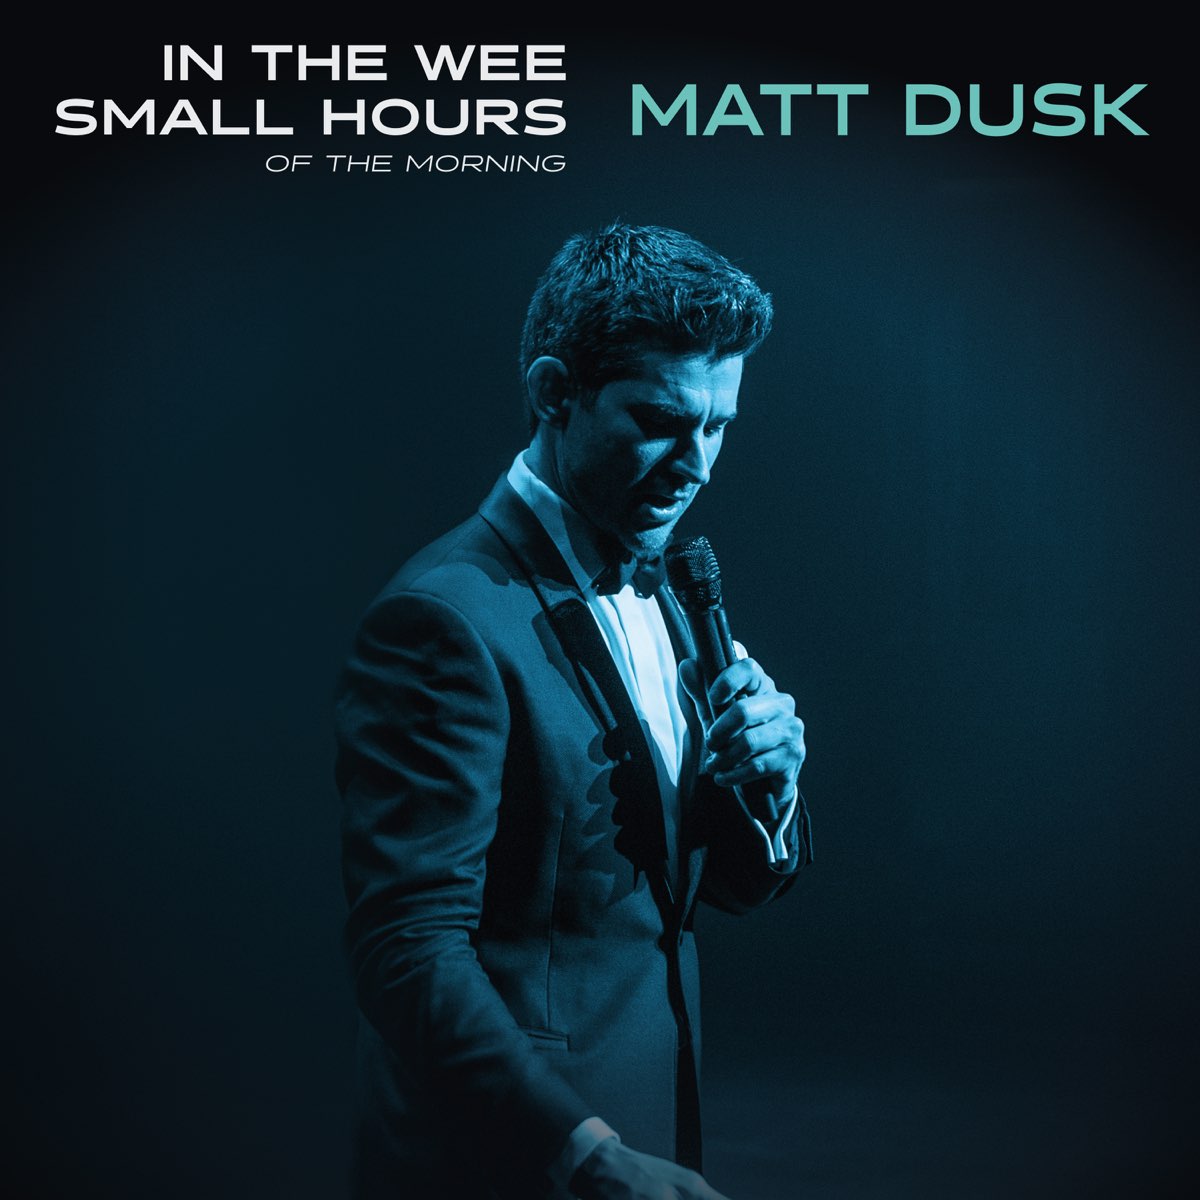 Мэтт Даск альбомы. In the Wee small hours. CD Dusk, Matt: good News. In the Wee small hours album Cover. Small hours